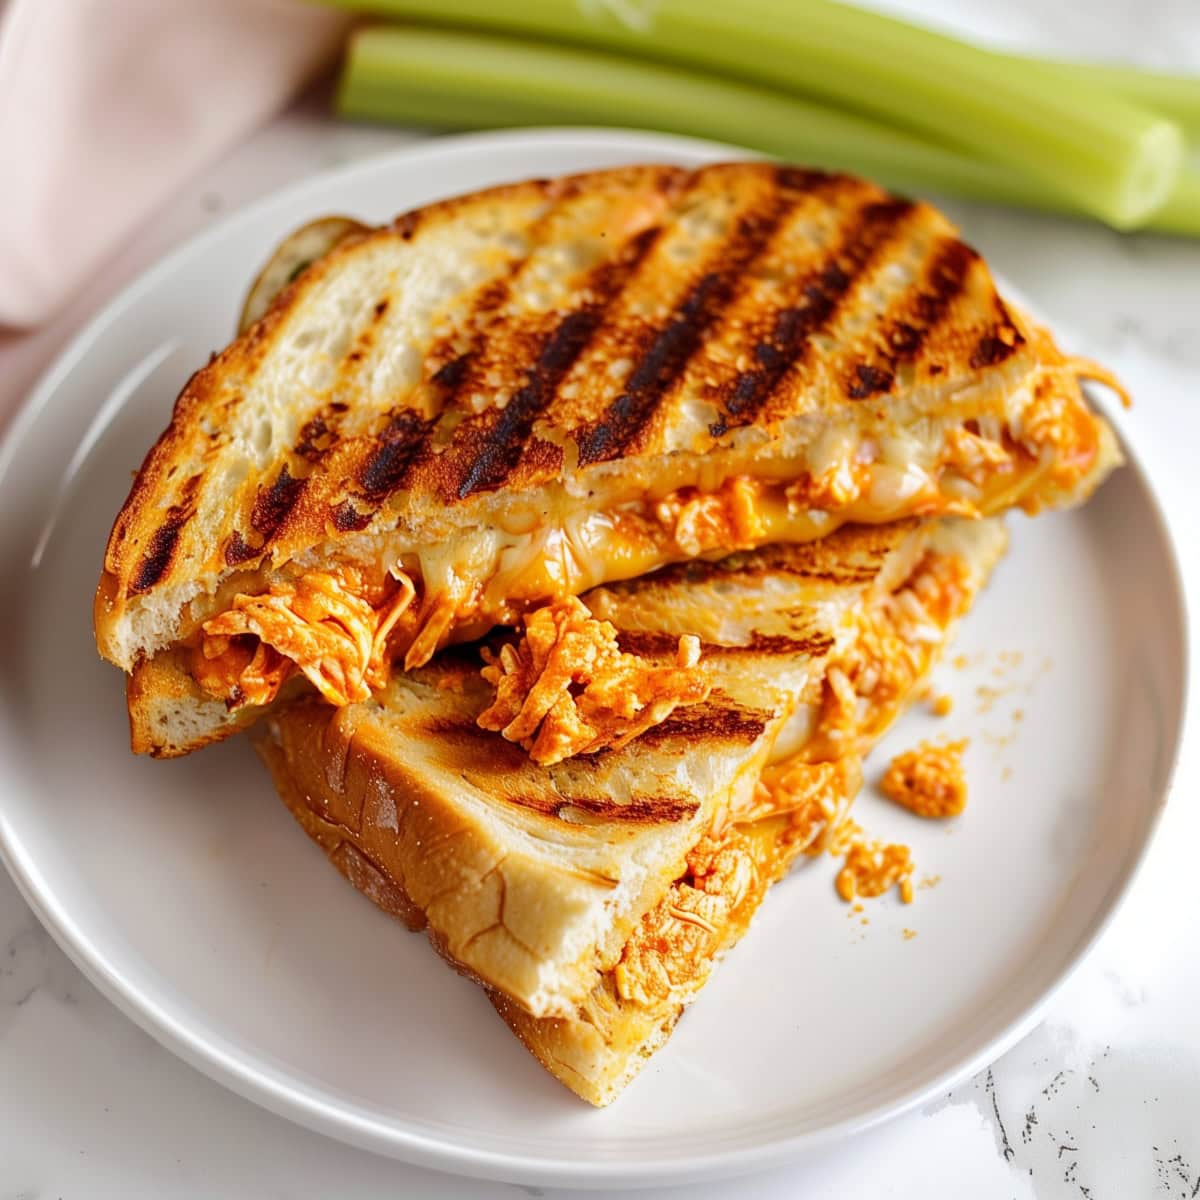 Tasty panini sandwich, featuring grilled chicken, buffalo sauce, and a blend of cheeses.